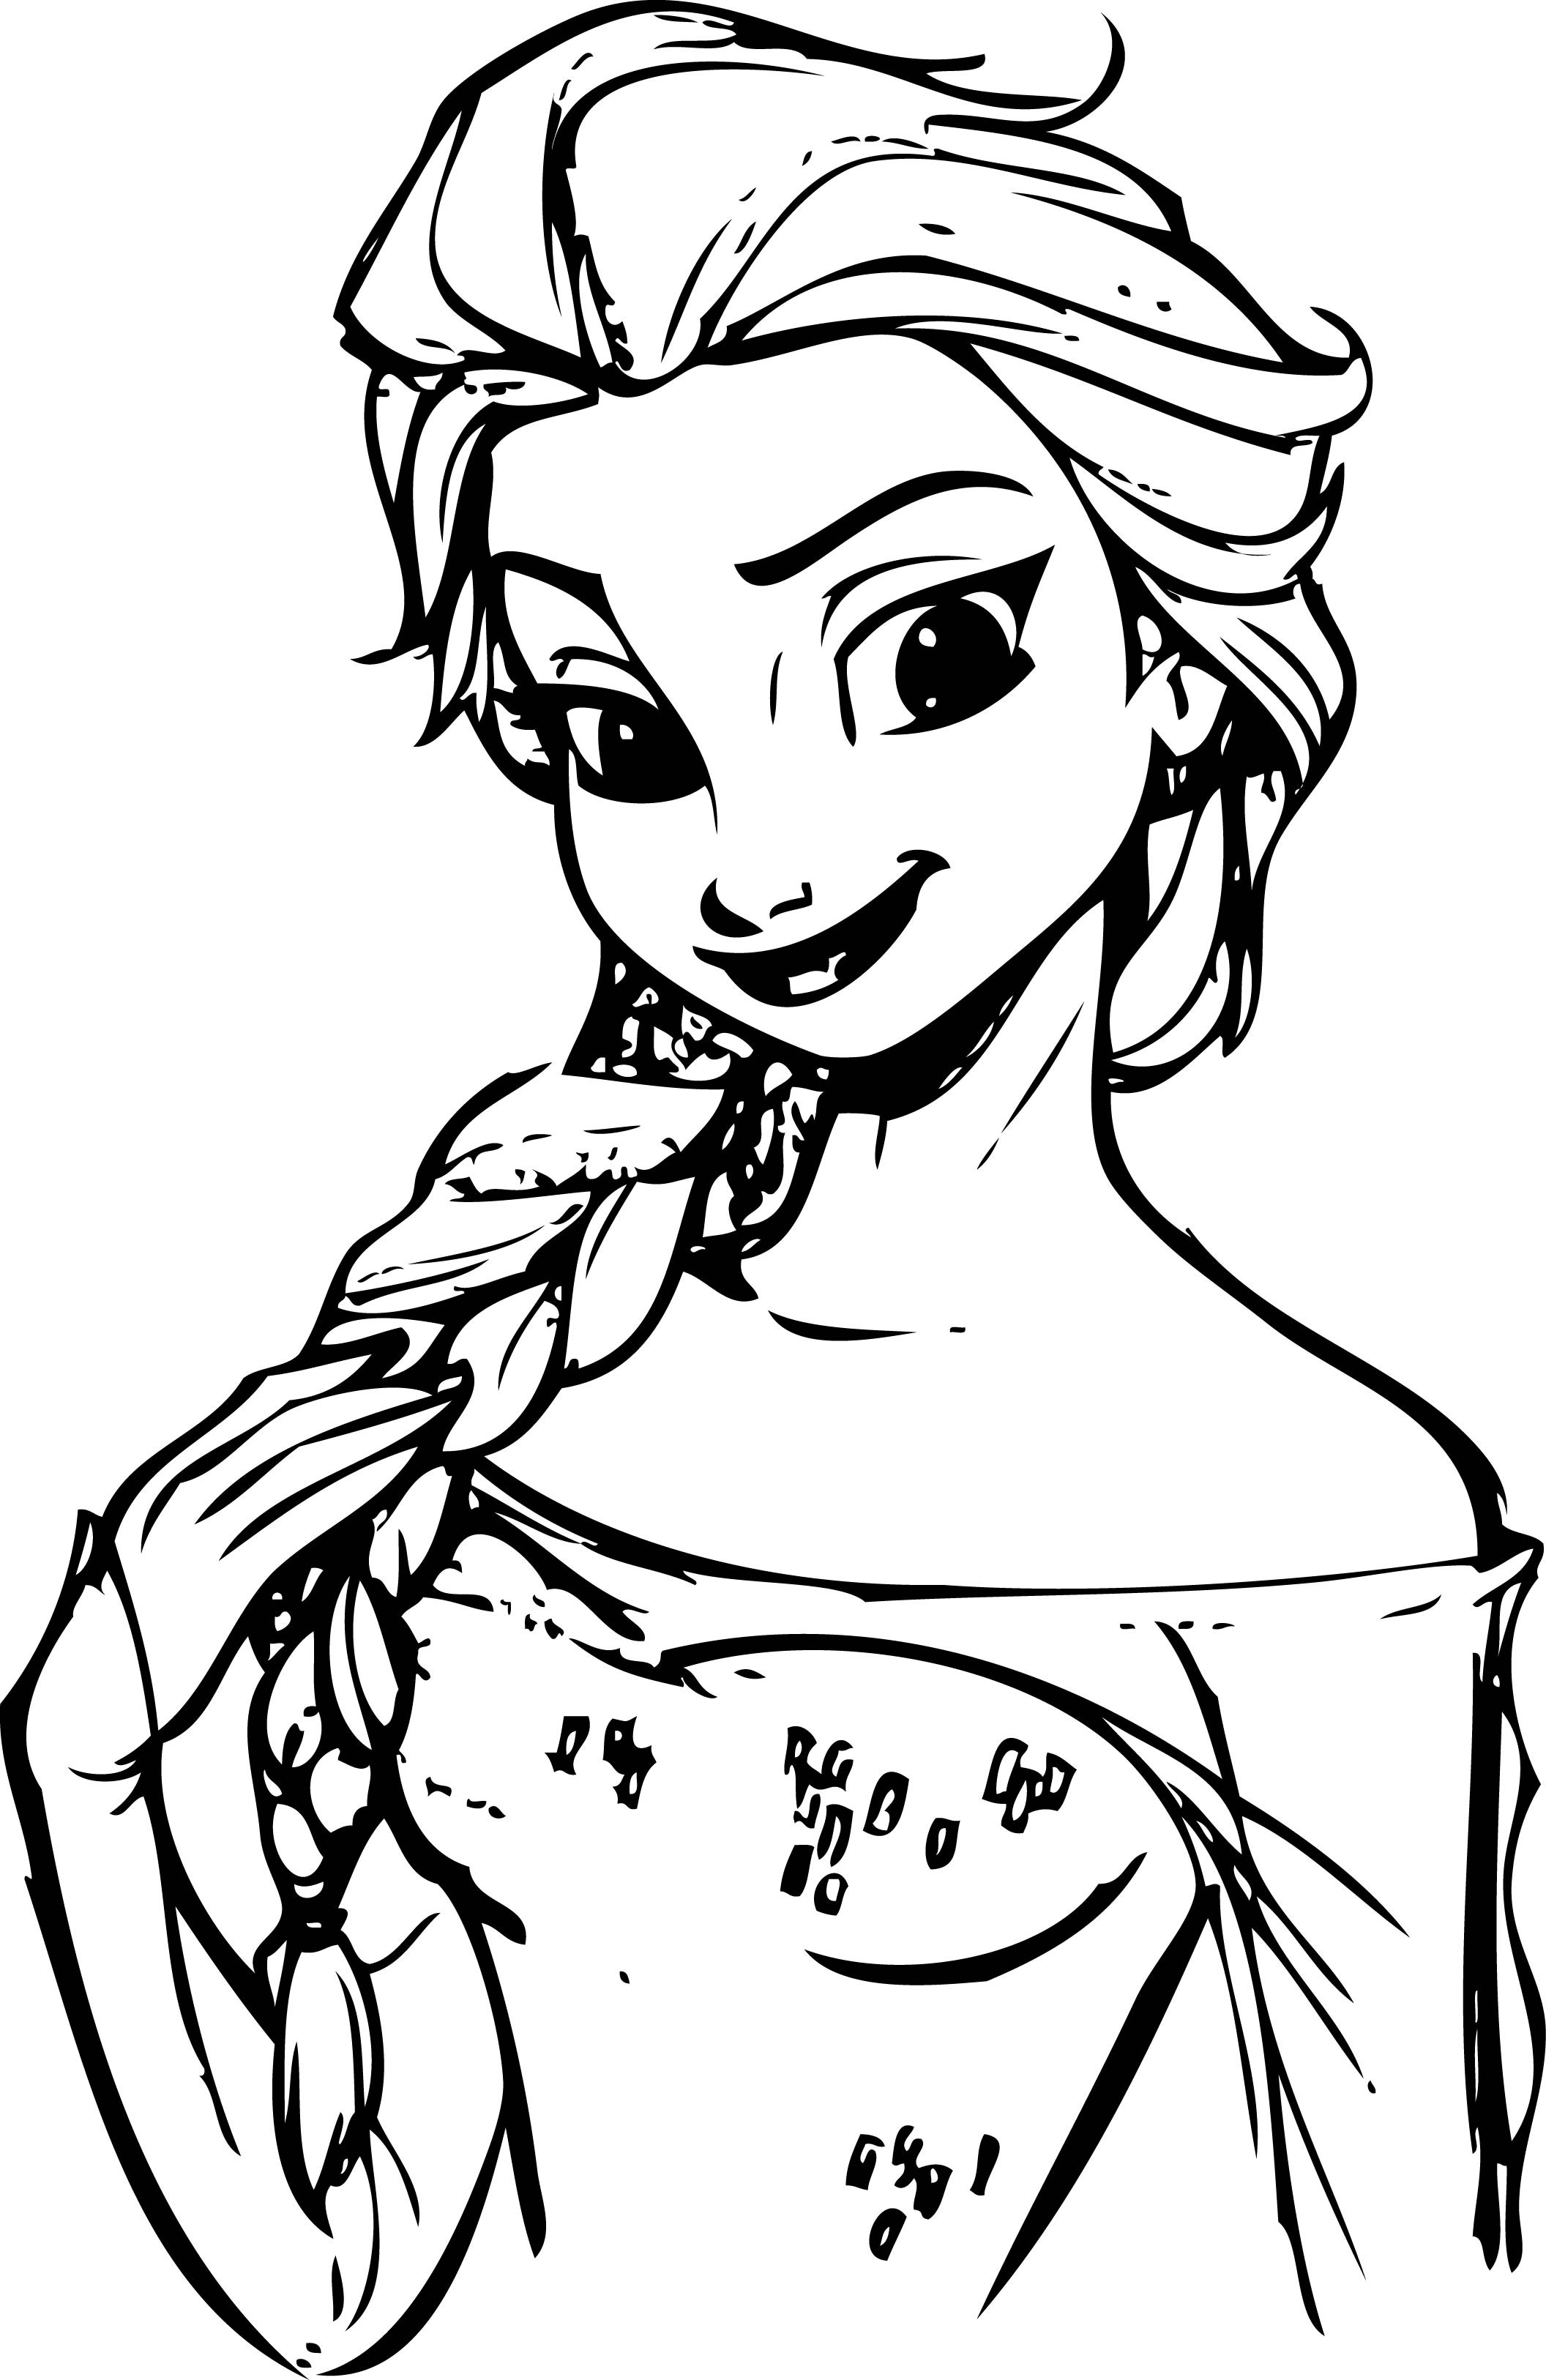 Coloring Books For Little Girls
 Frozen Anna Elsa Coloring Page